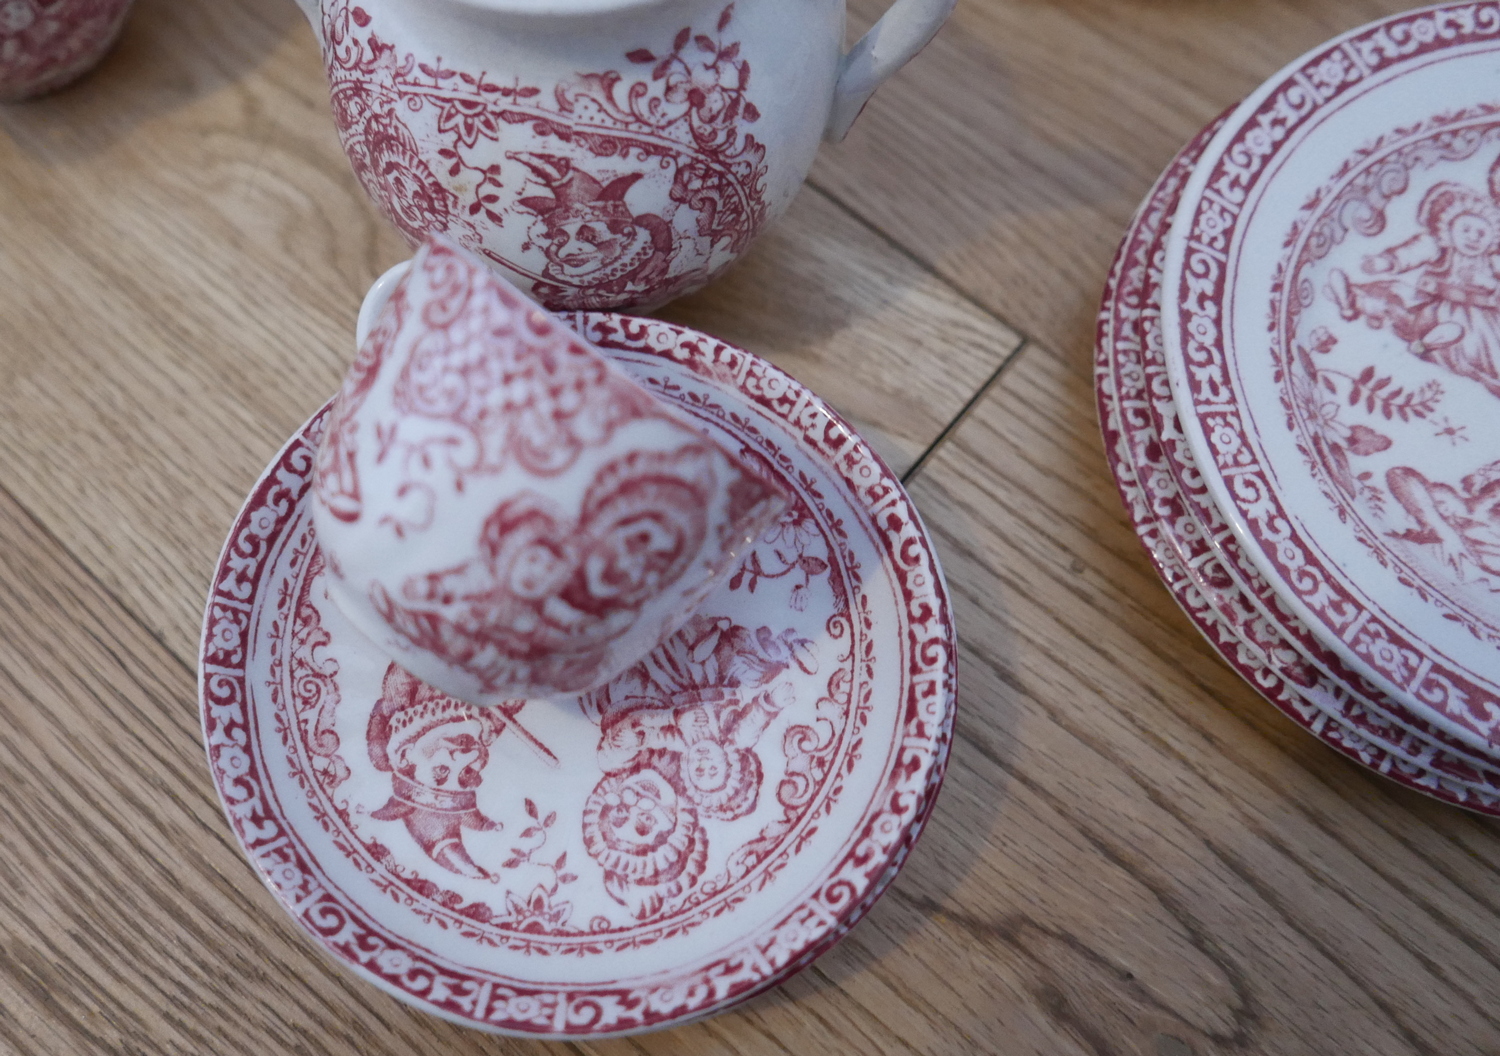 Antique Allertons Punch and Judy Childs Crockery Set -Plates-Saucers-Cups-Jug-Lidded Pot etc. - Image 7 of 8